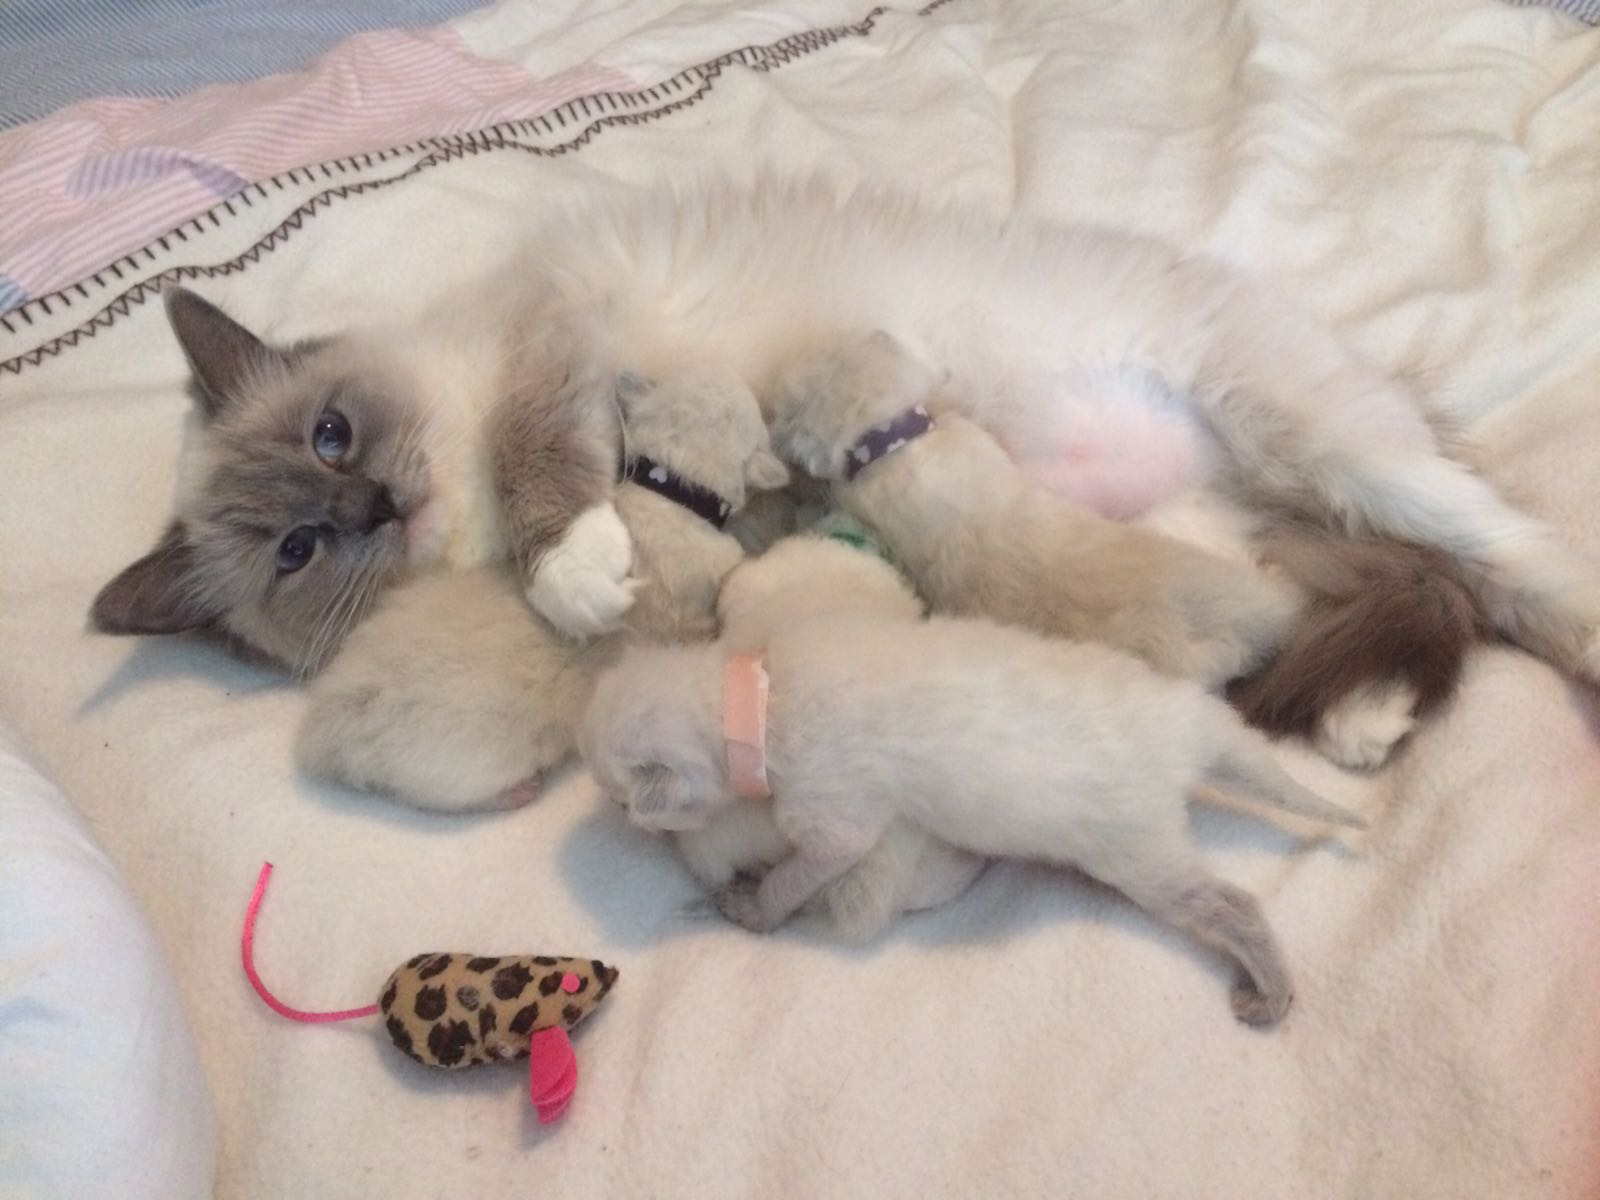 Melodrama Signaal thermometer Mamma Lux met kittens 2 weken oud - In2cats